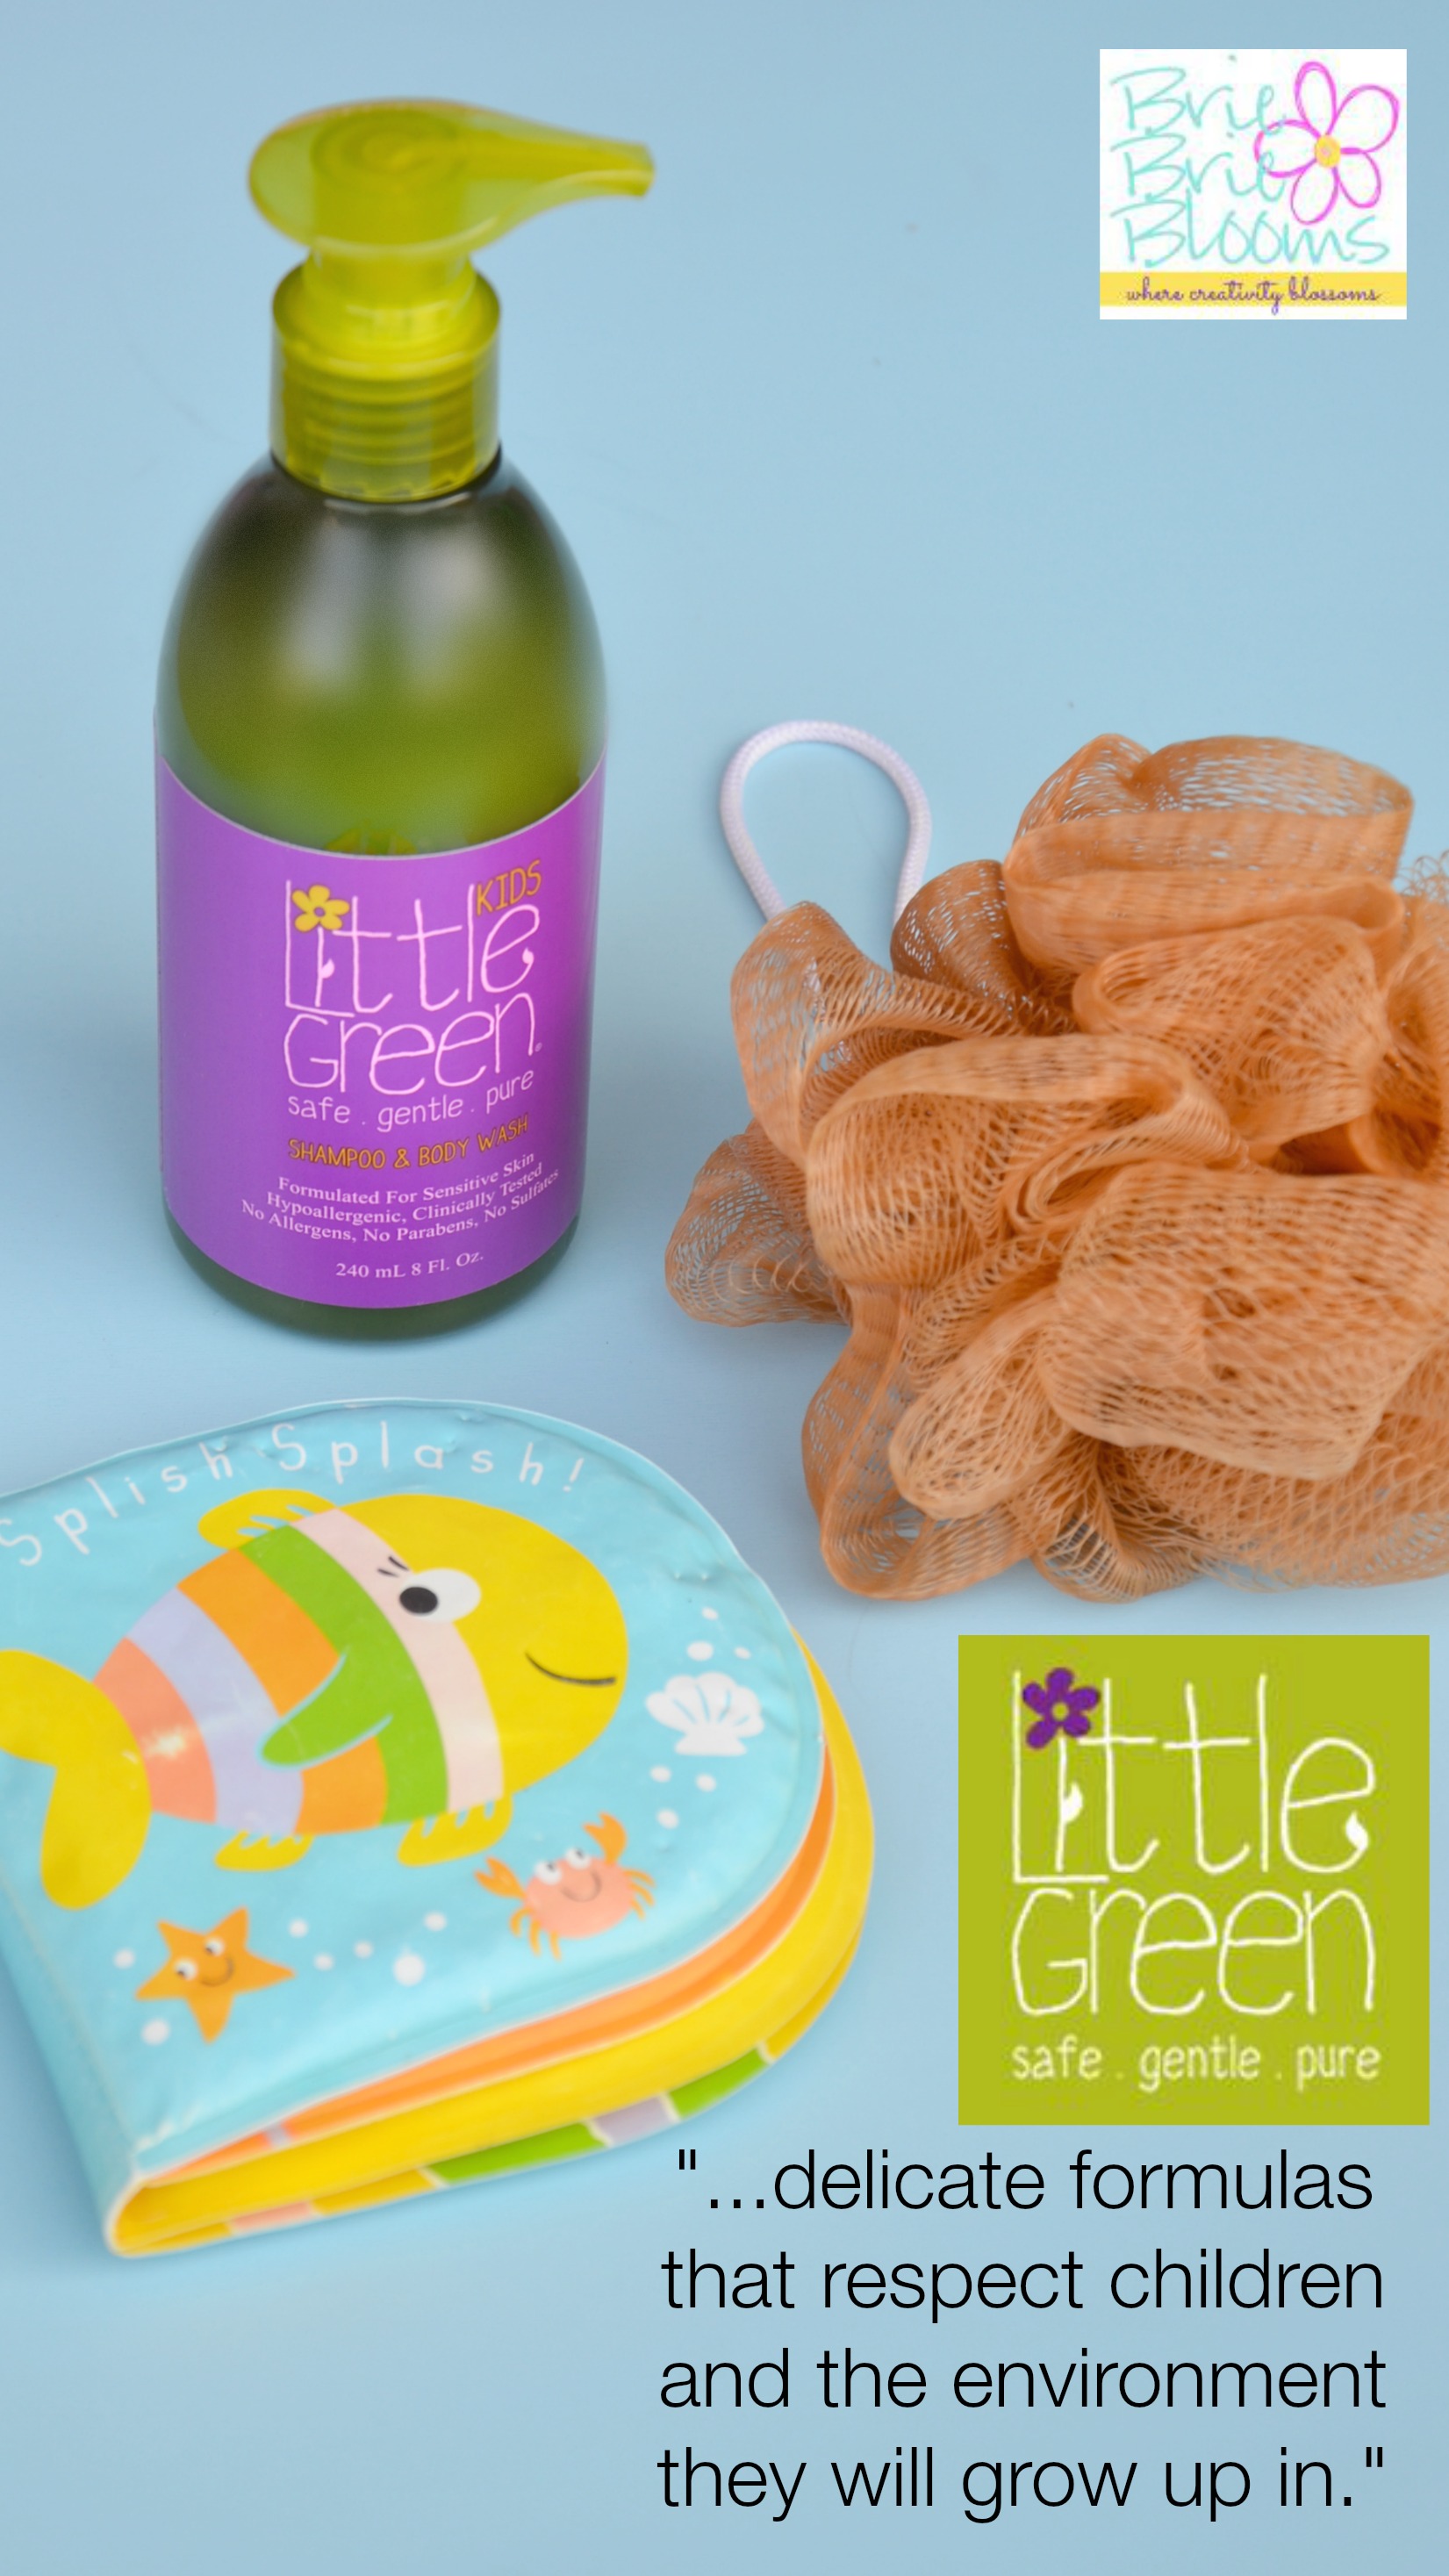 Little-Green-hypoallergenic-products-for-children